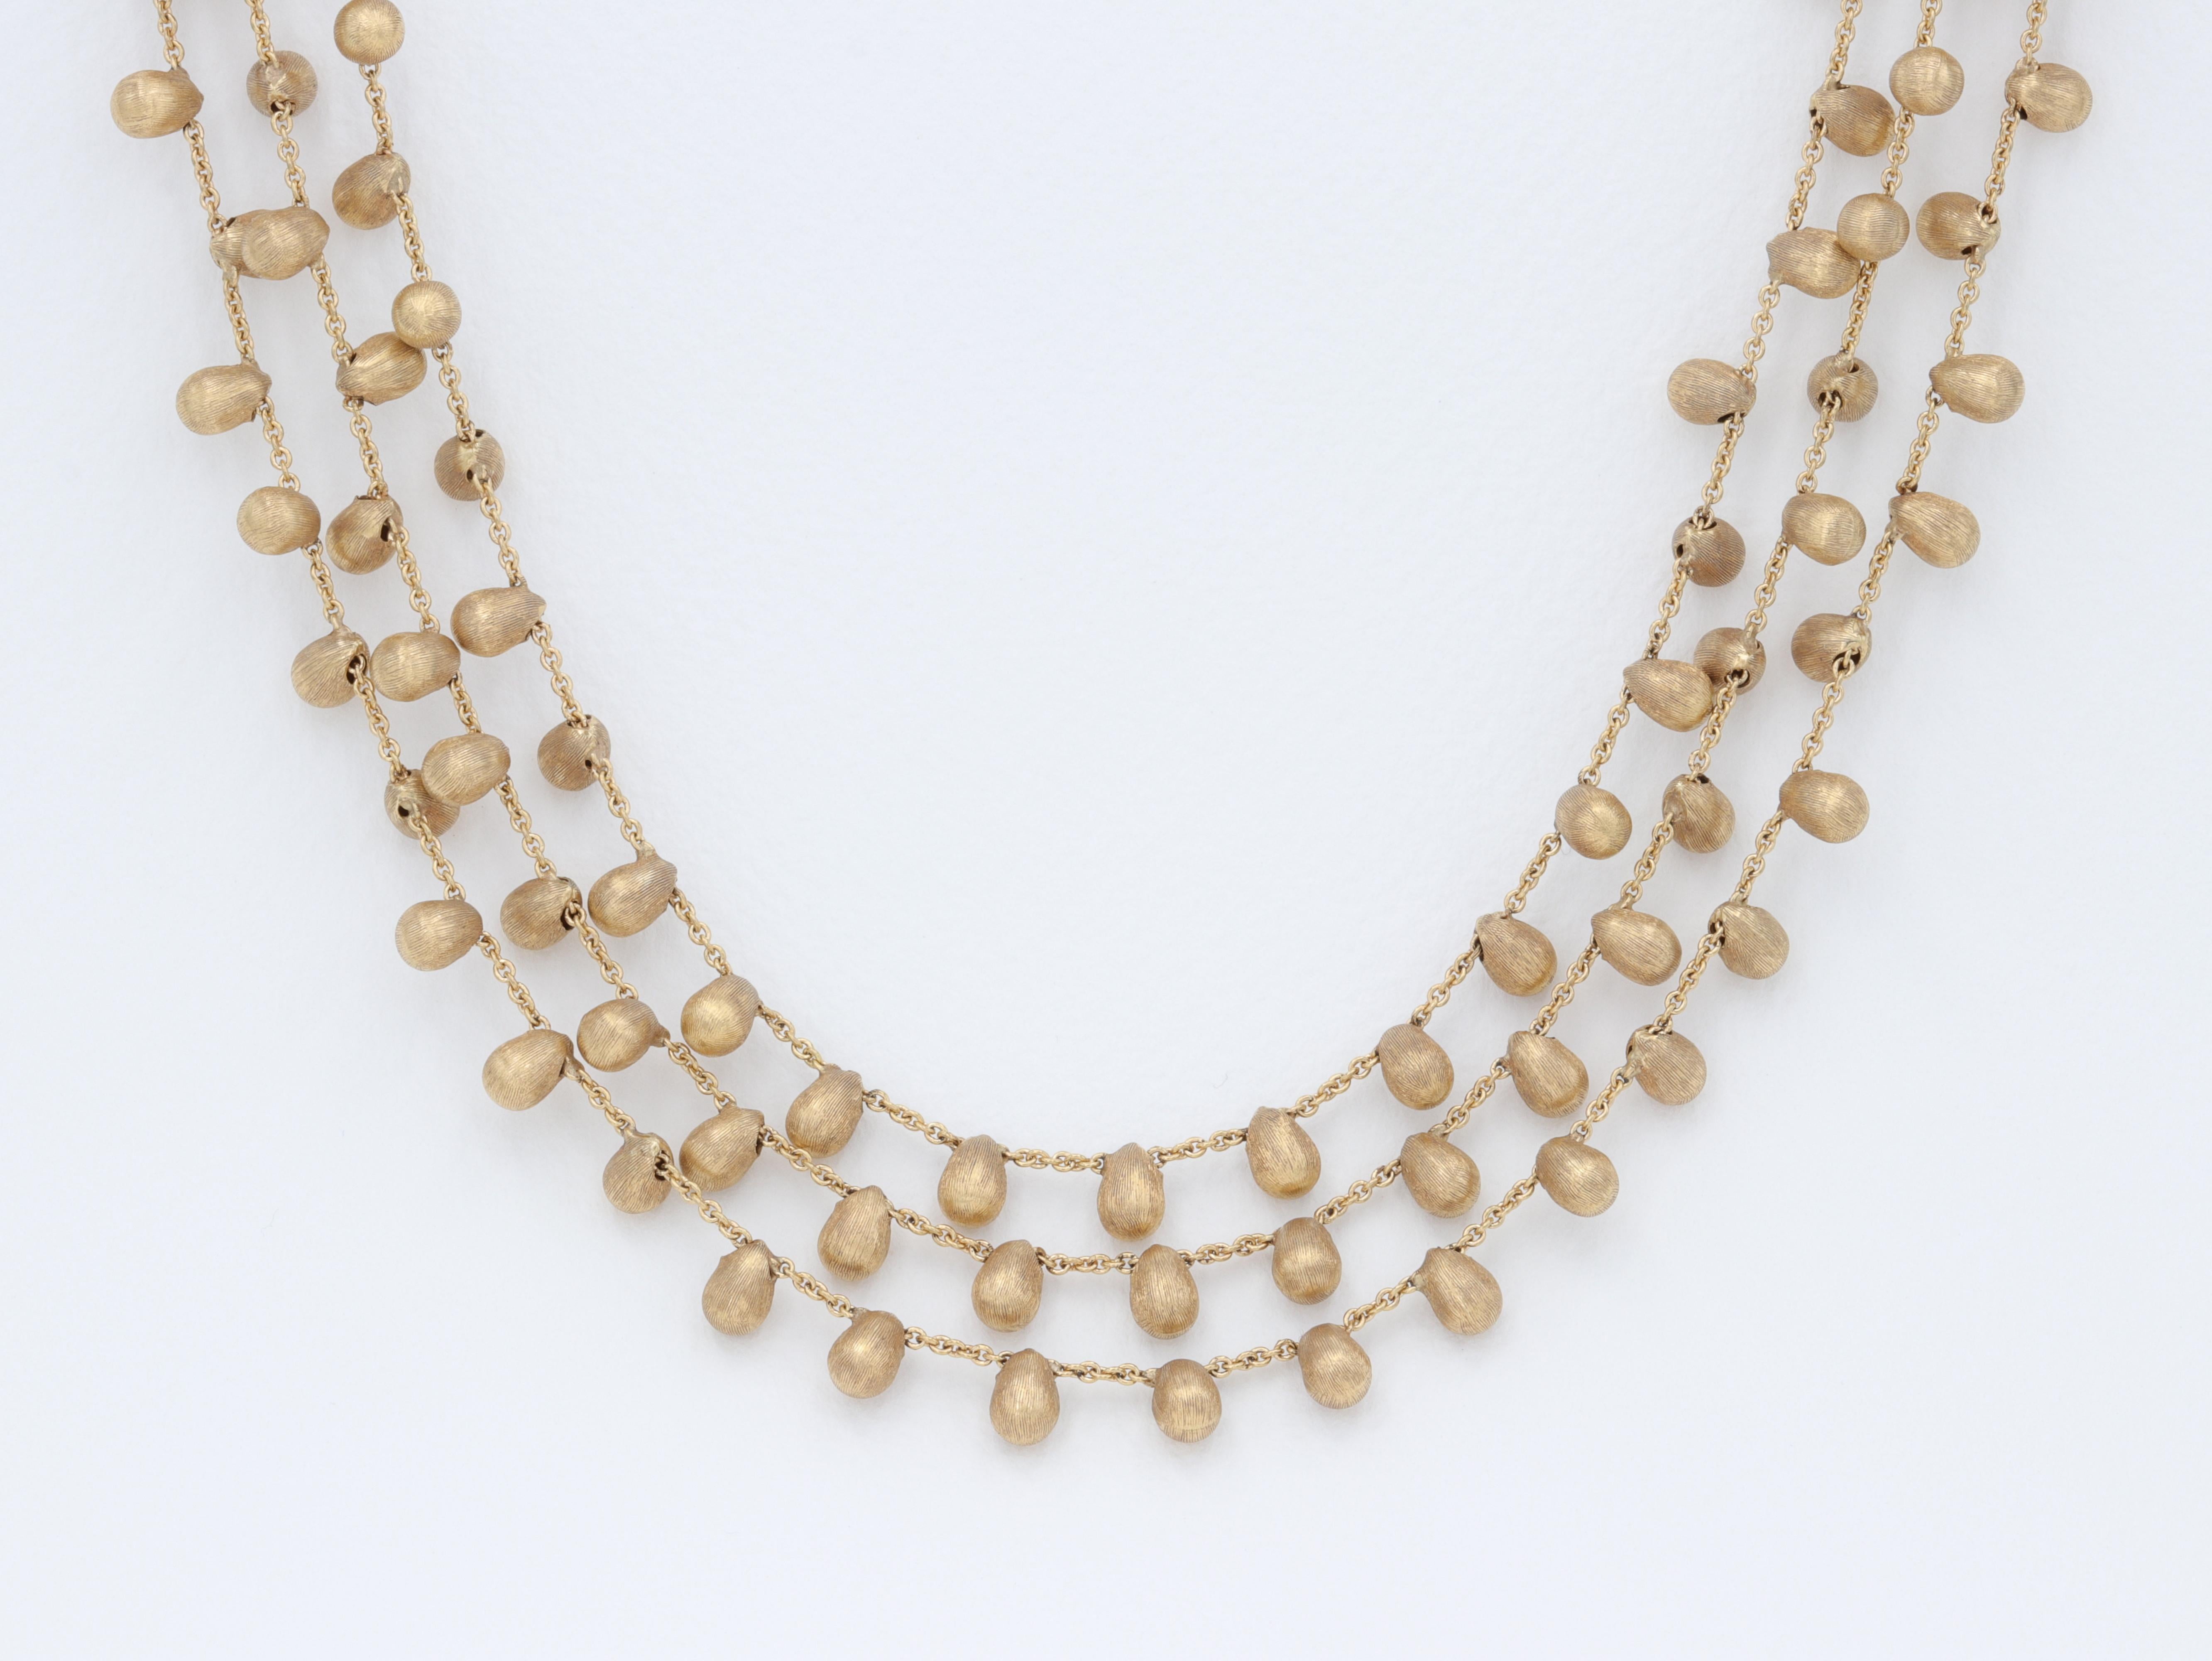 Marco Bicego 3 Strand Acapulco Necklace 18 Karat Yellow Gold

In like new condition.

3 Row layered style necklace, with a brushed finish.

Looking to complete the set? Check out the matching earrings and bracelet in our inventory. 

16 inch length. 